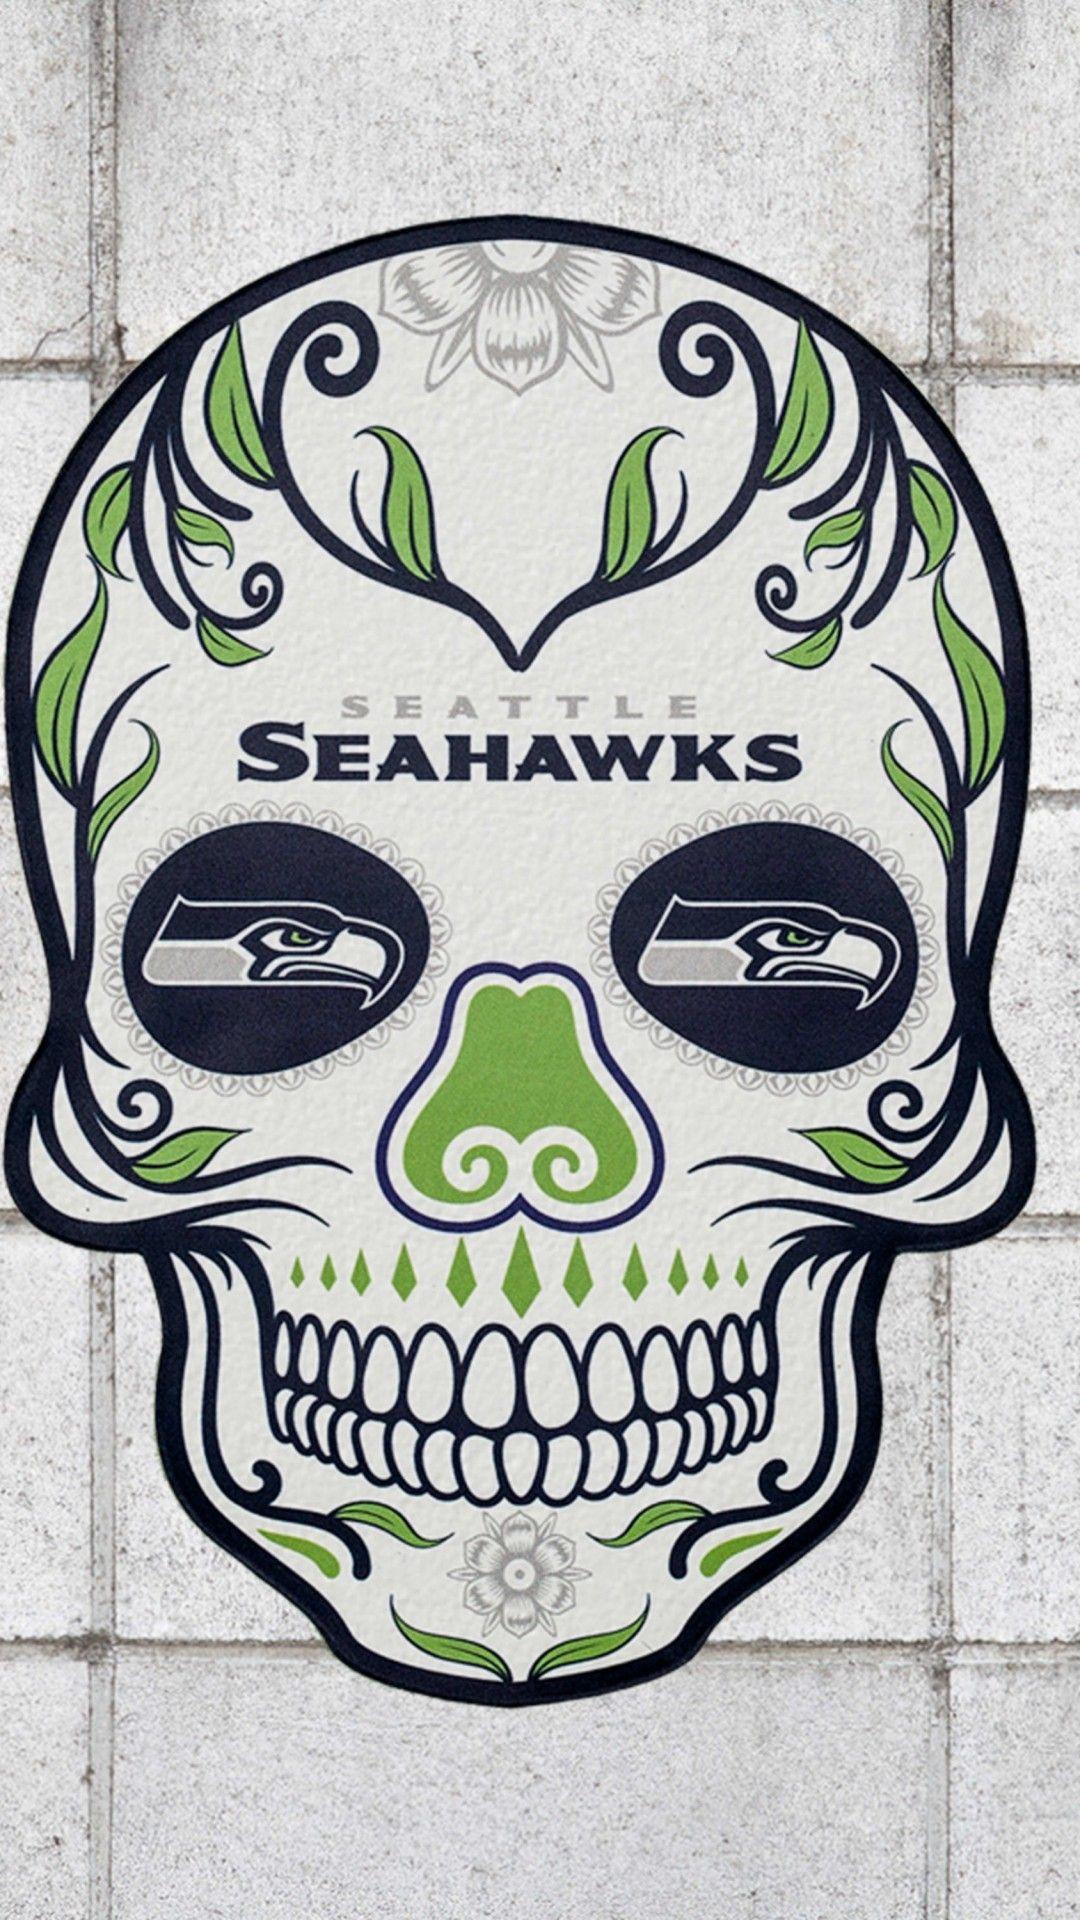 Seahawks Logo - Download 1080x1920 Seahawks Logo, American Football Wallpapers for ...